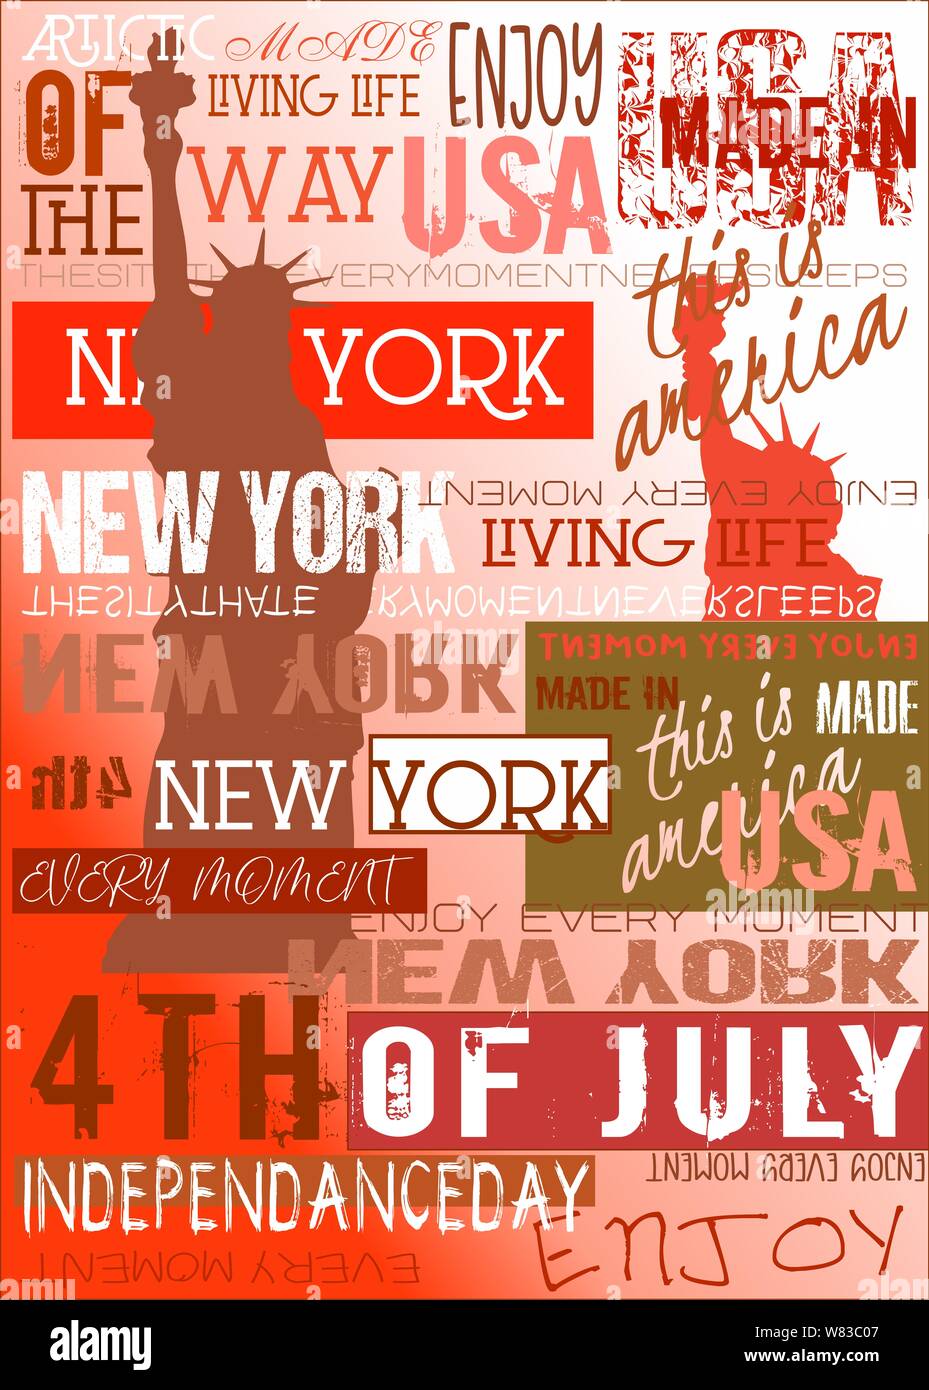 New York Usa NYC Poster 4TH July Edition Stock Photo